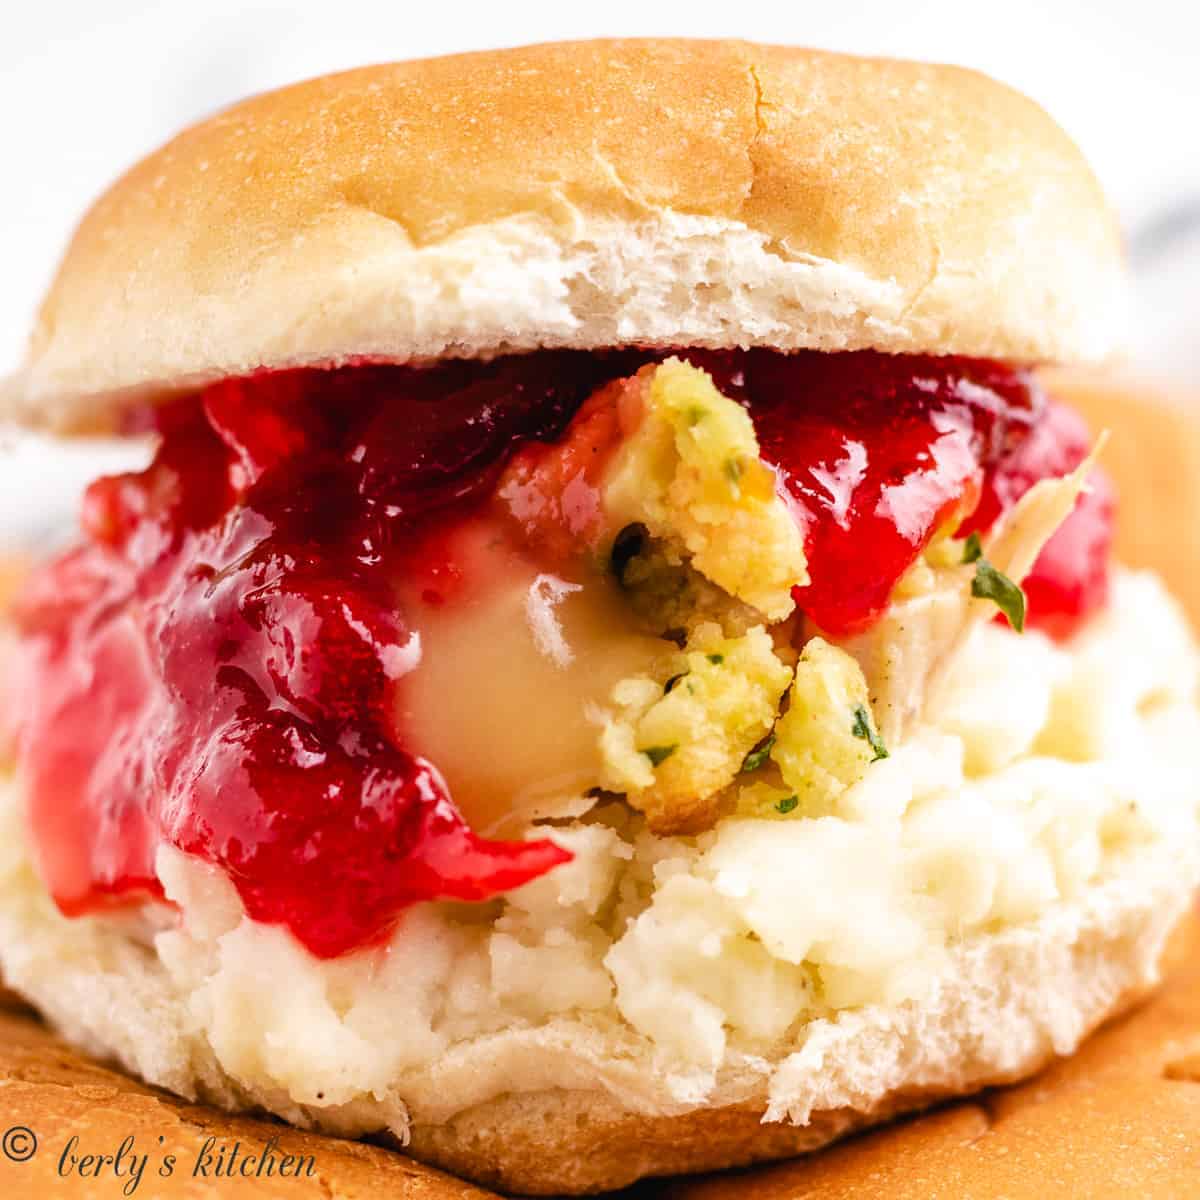 A Thanksgiving slider on made with all the fixings.